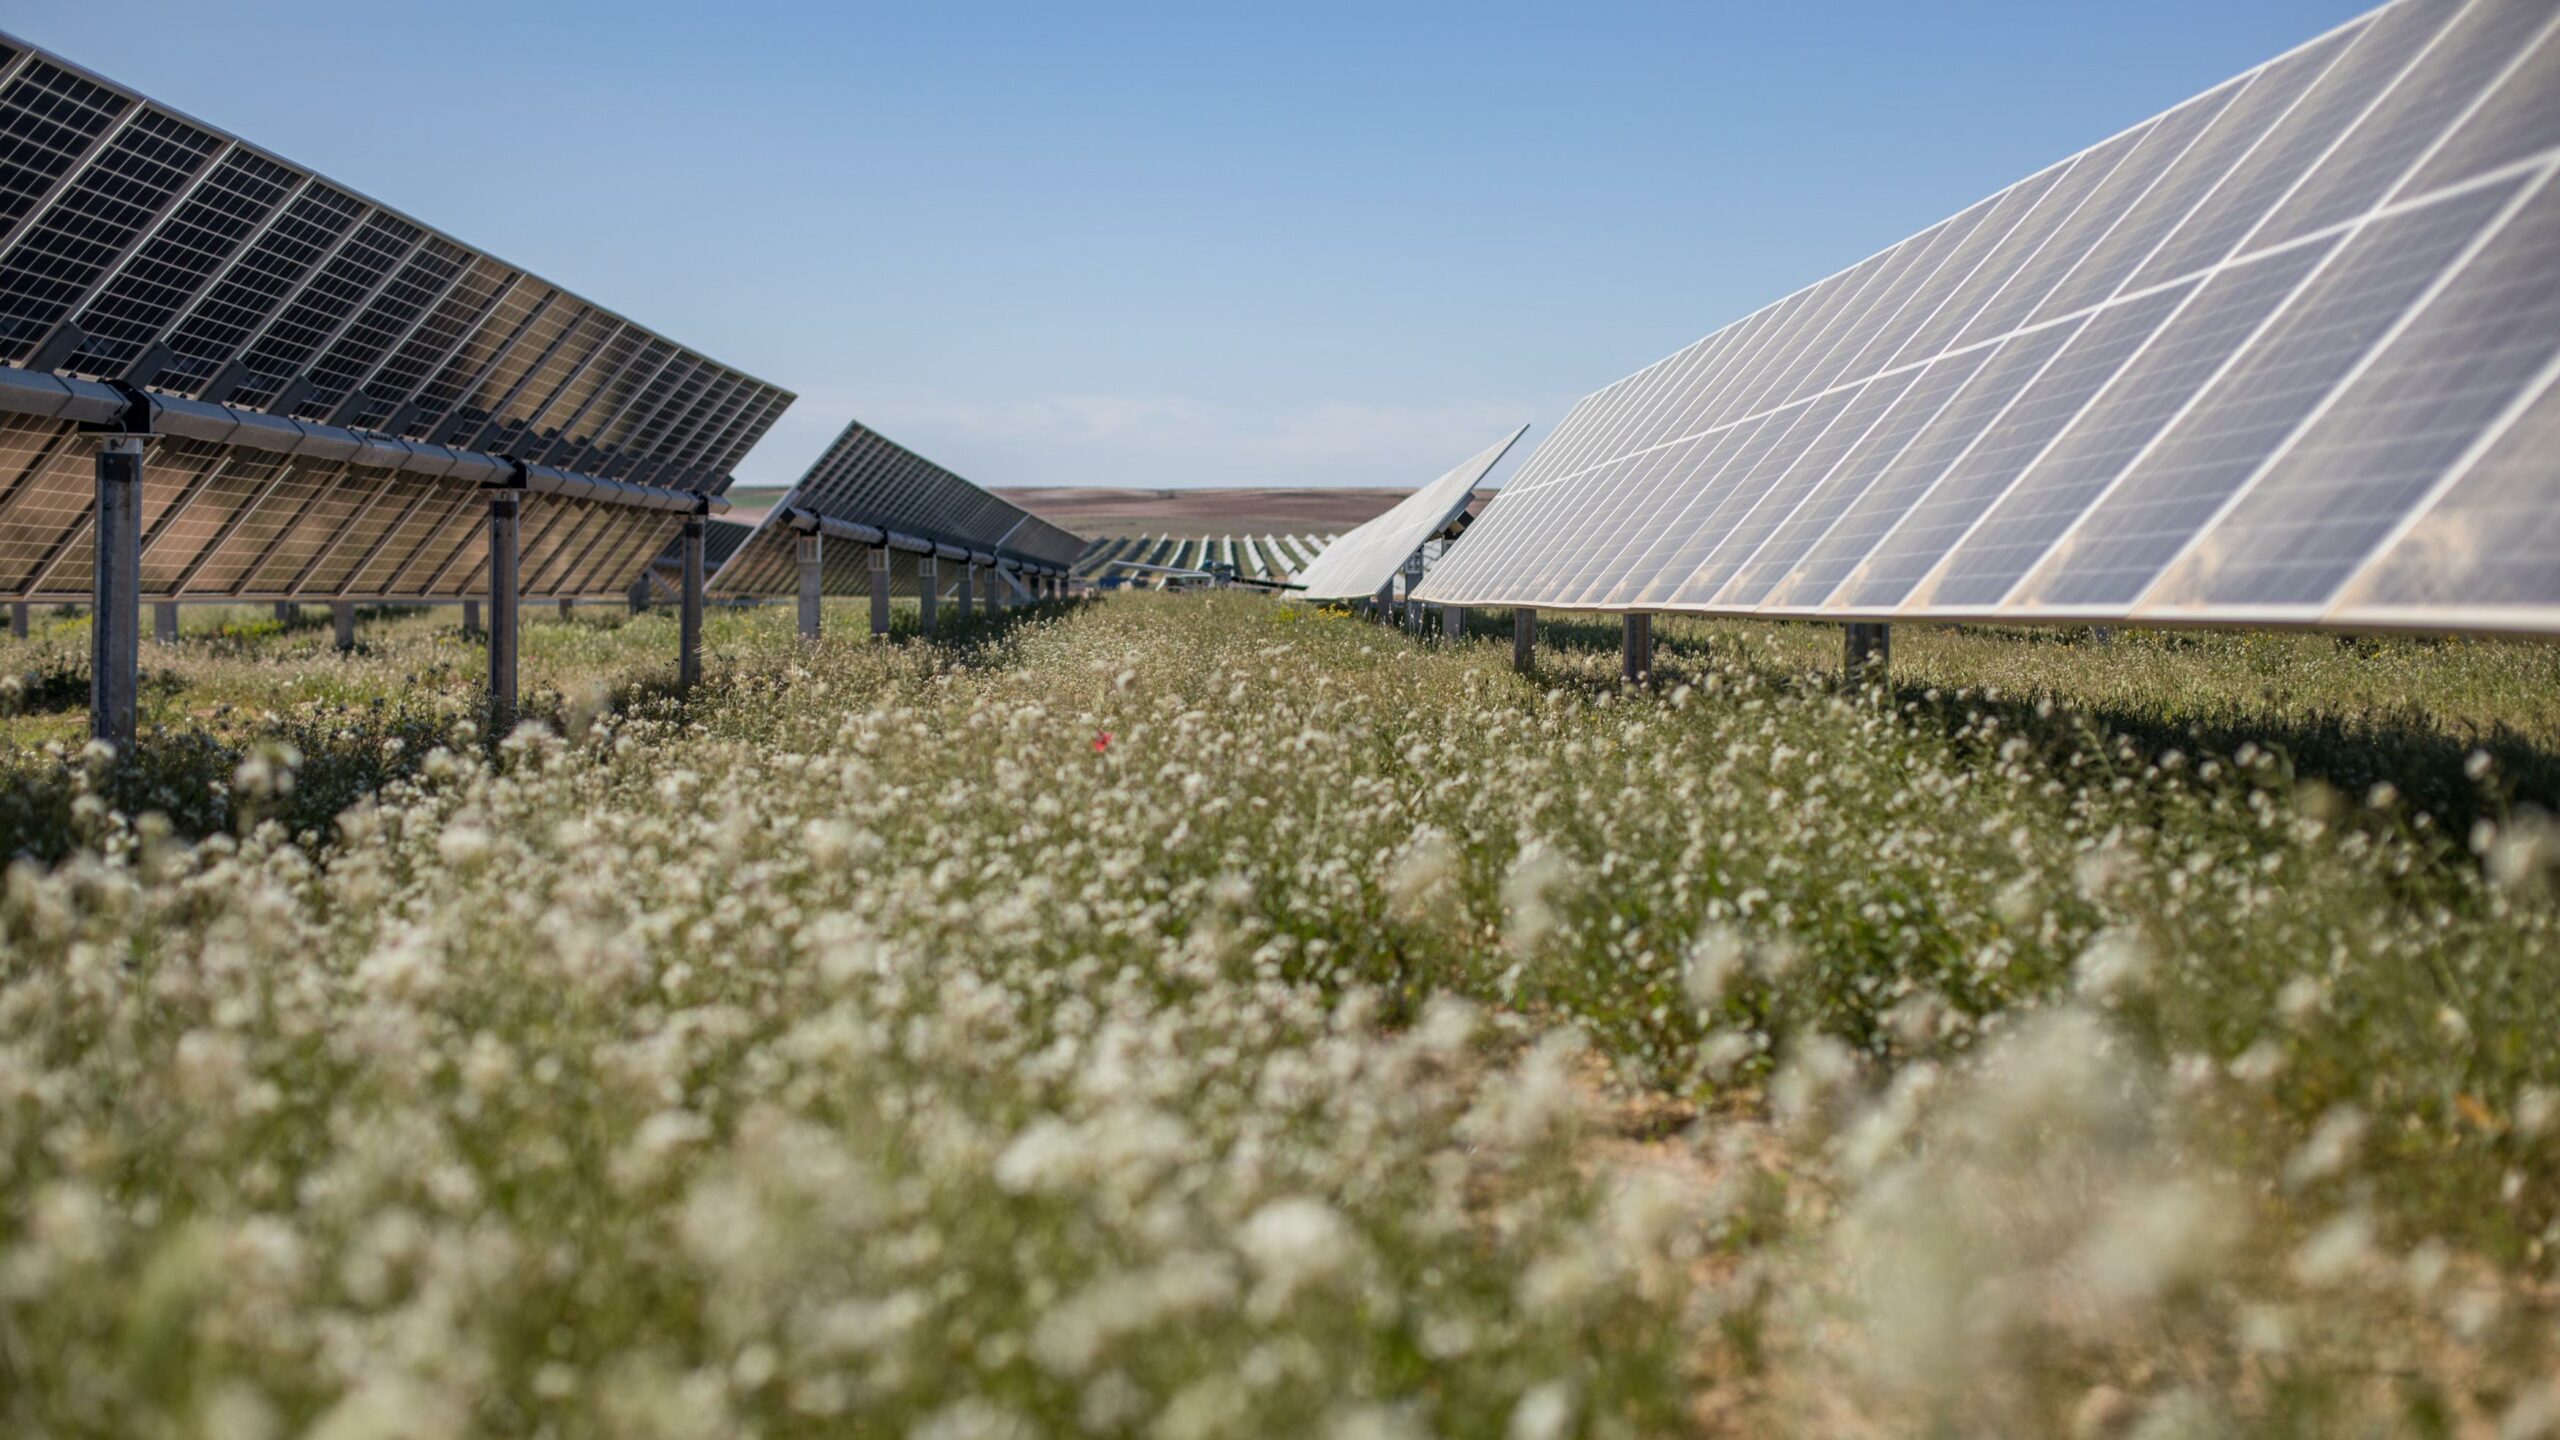 Ground level shot of plants, between rows of solar panels